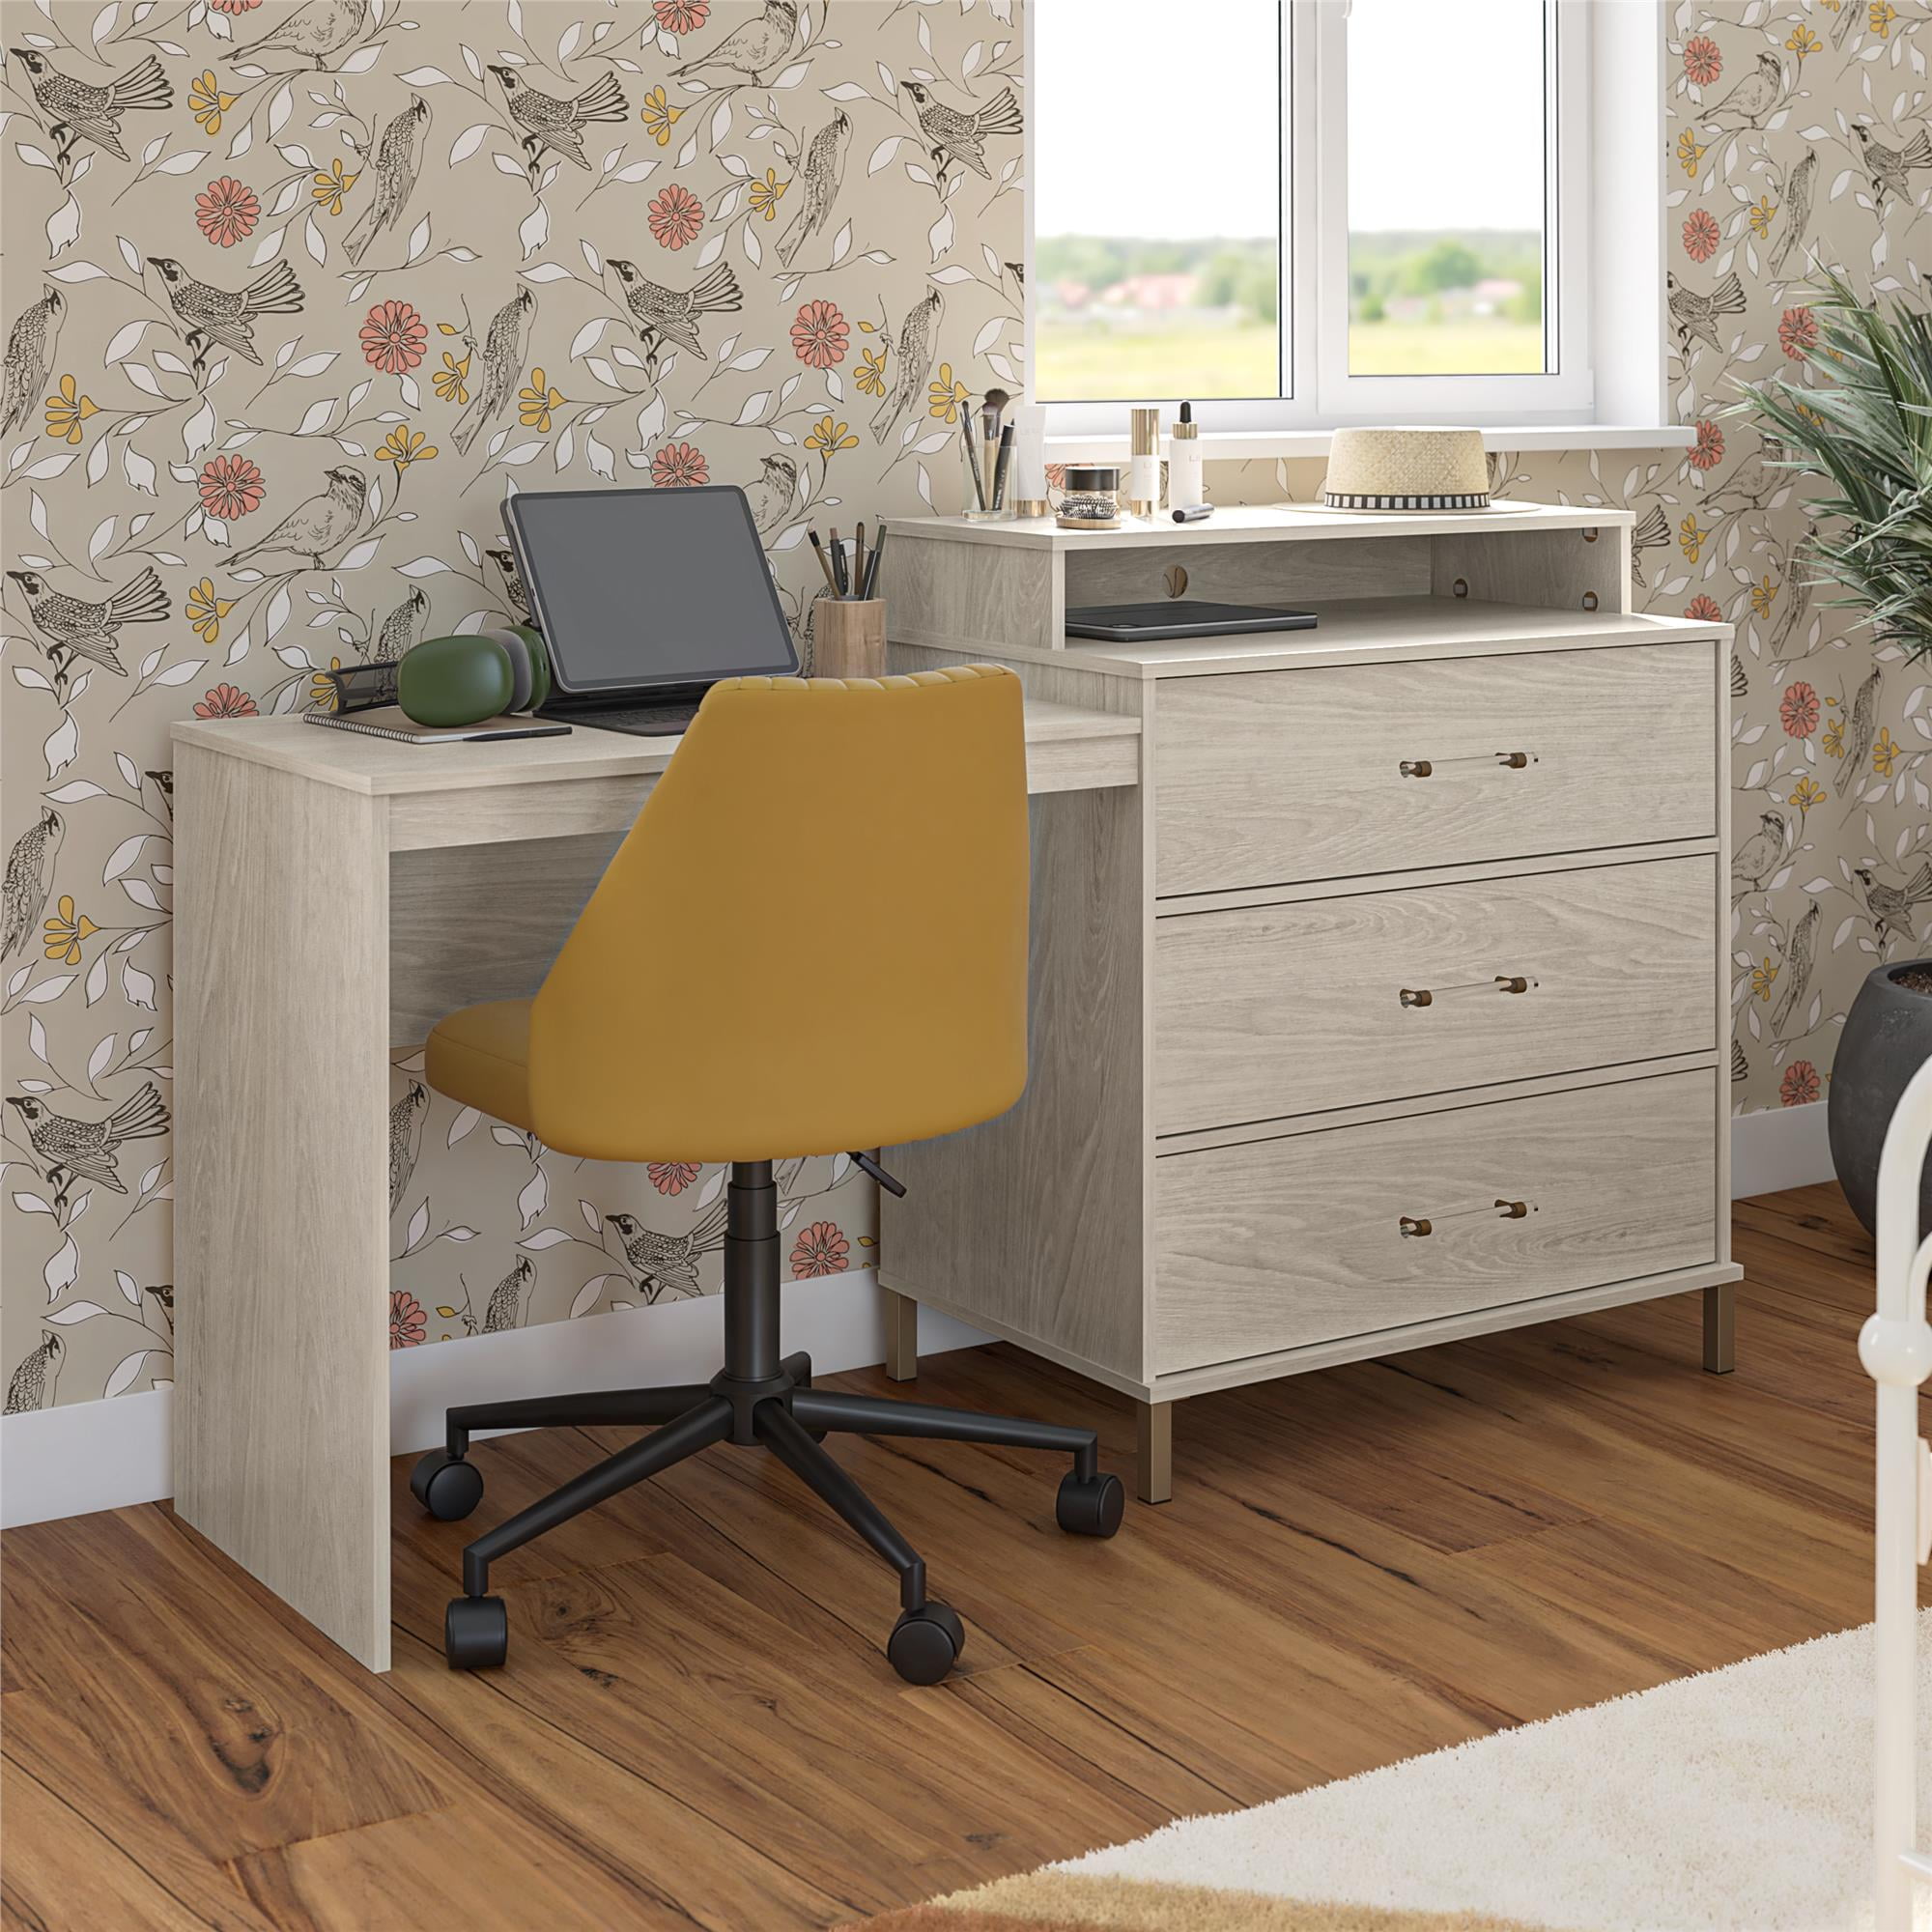 Blaire Small Space Desk and Gold Paige Desk Chair Set